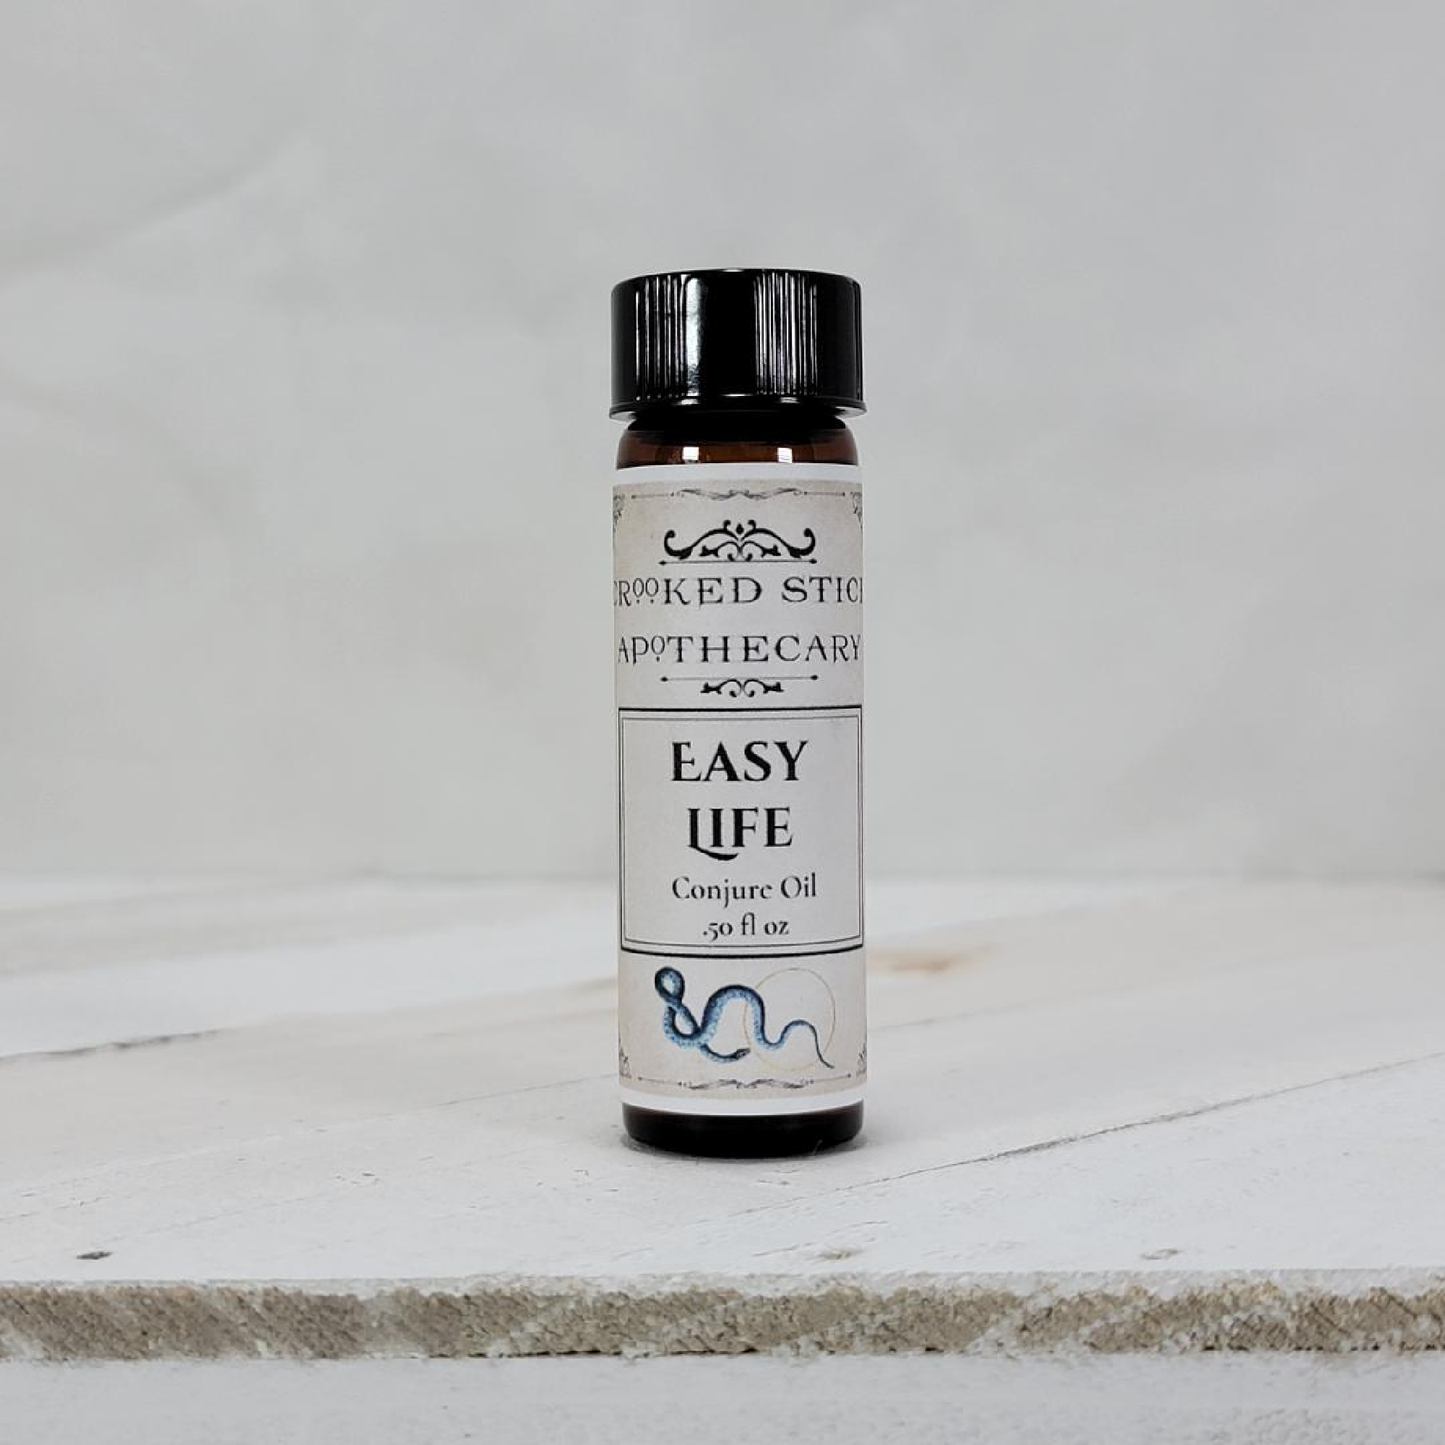 Easy Life Conjure Oil